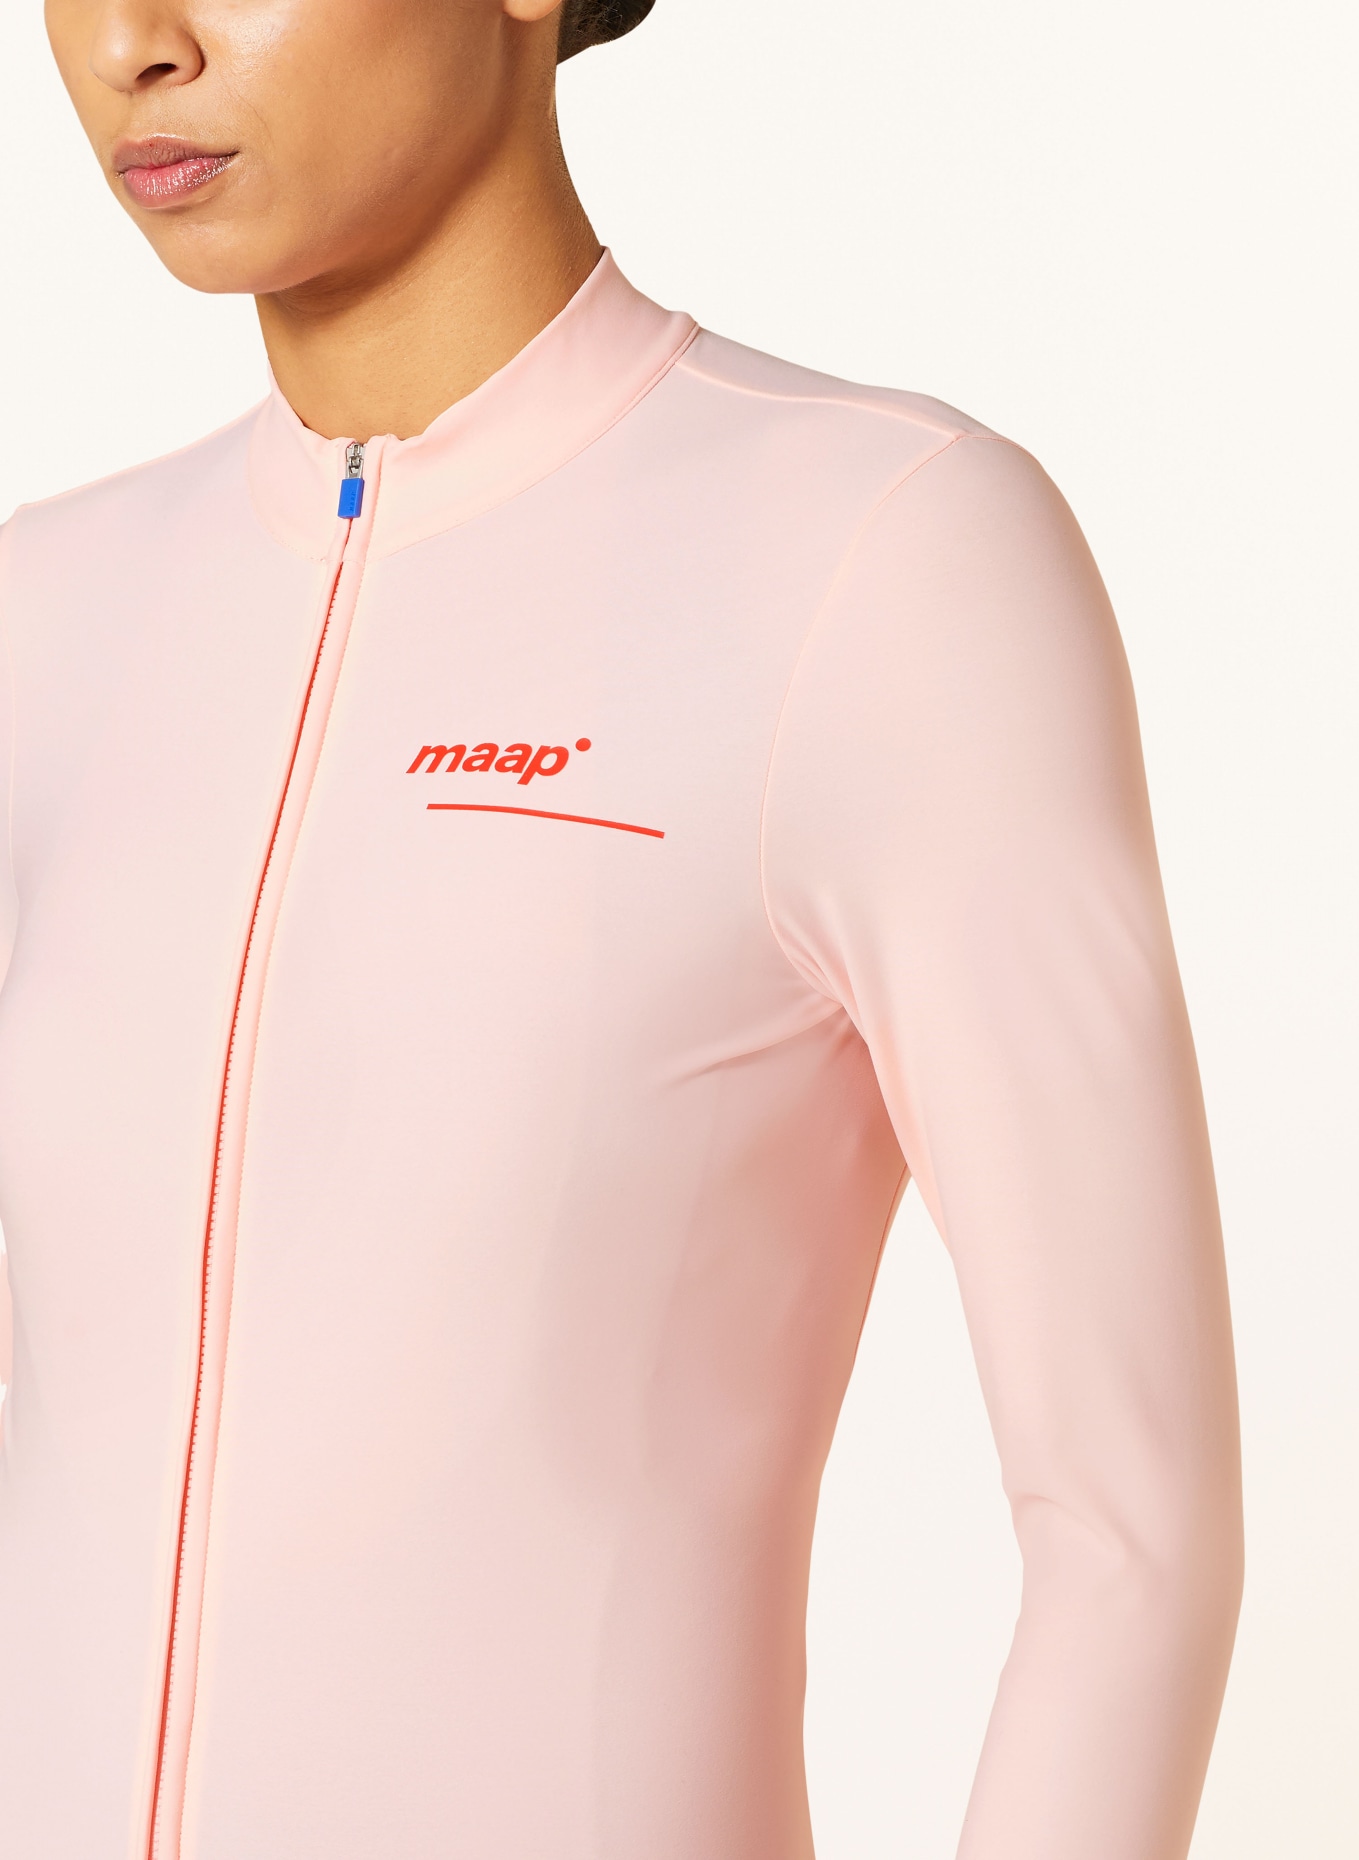 MAAP Cycling jersey, Color: LIGHT PINK (Image 4)